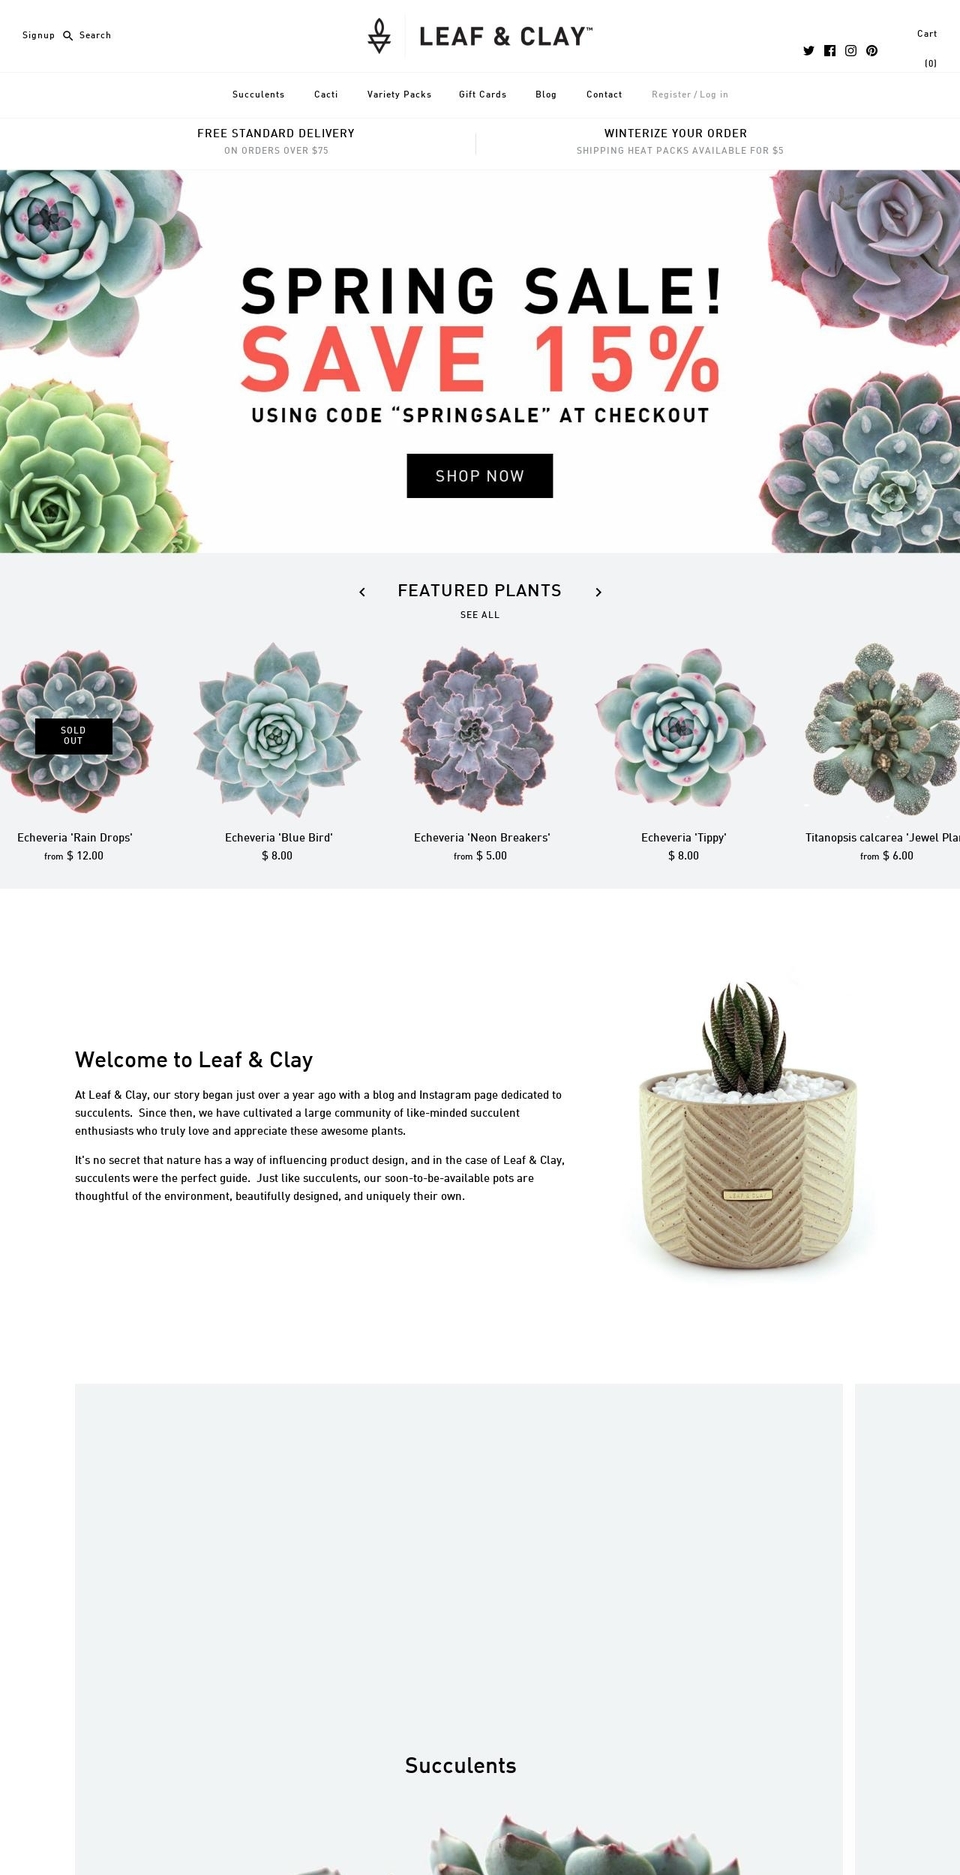 Motion Shopify theme site example leafandclay.co